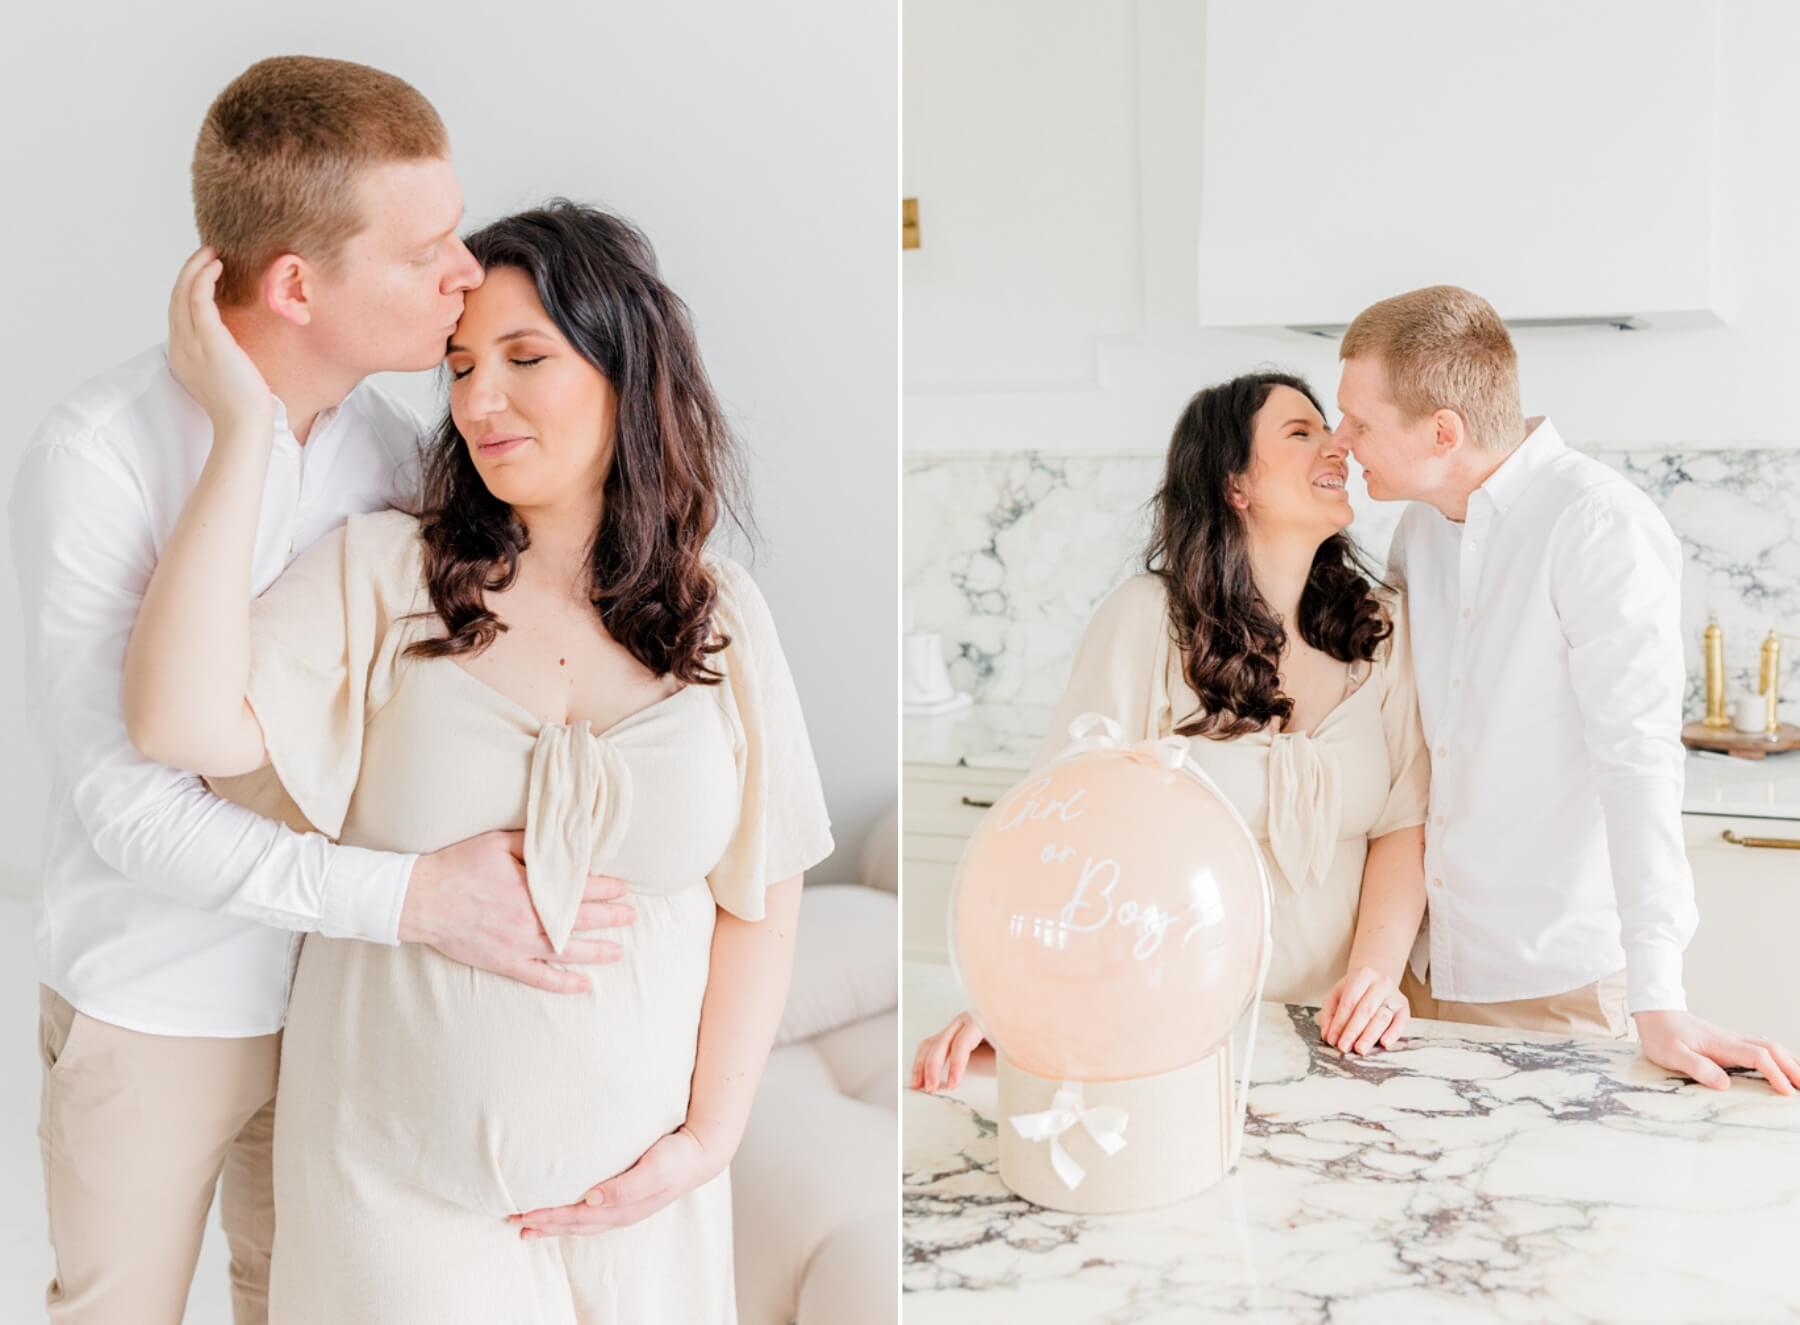 Expecting parents stand in a kitchen leaning in for a kiss with a balloon